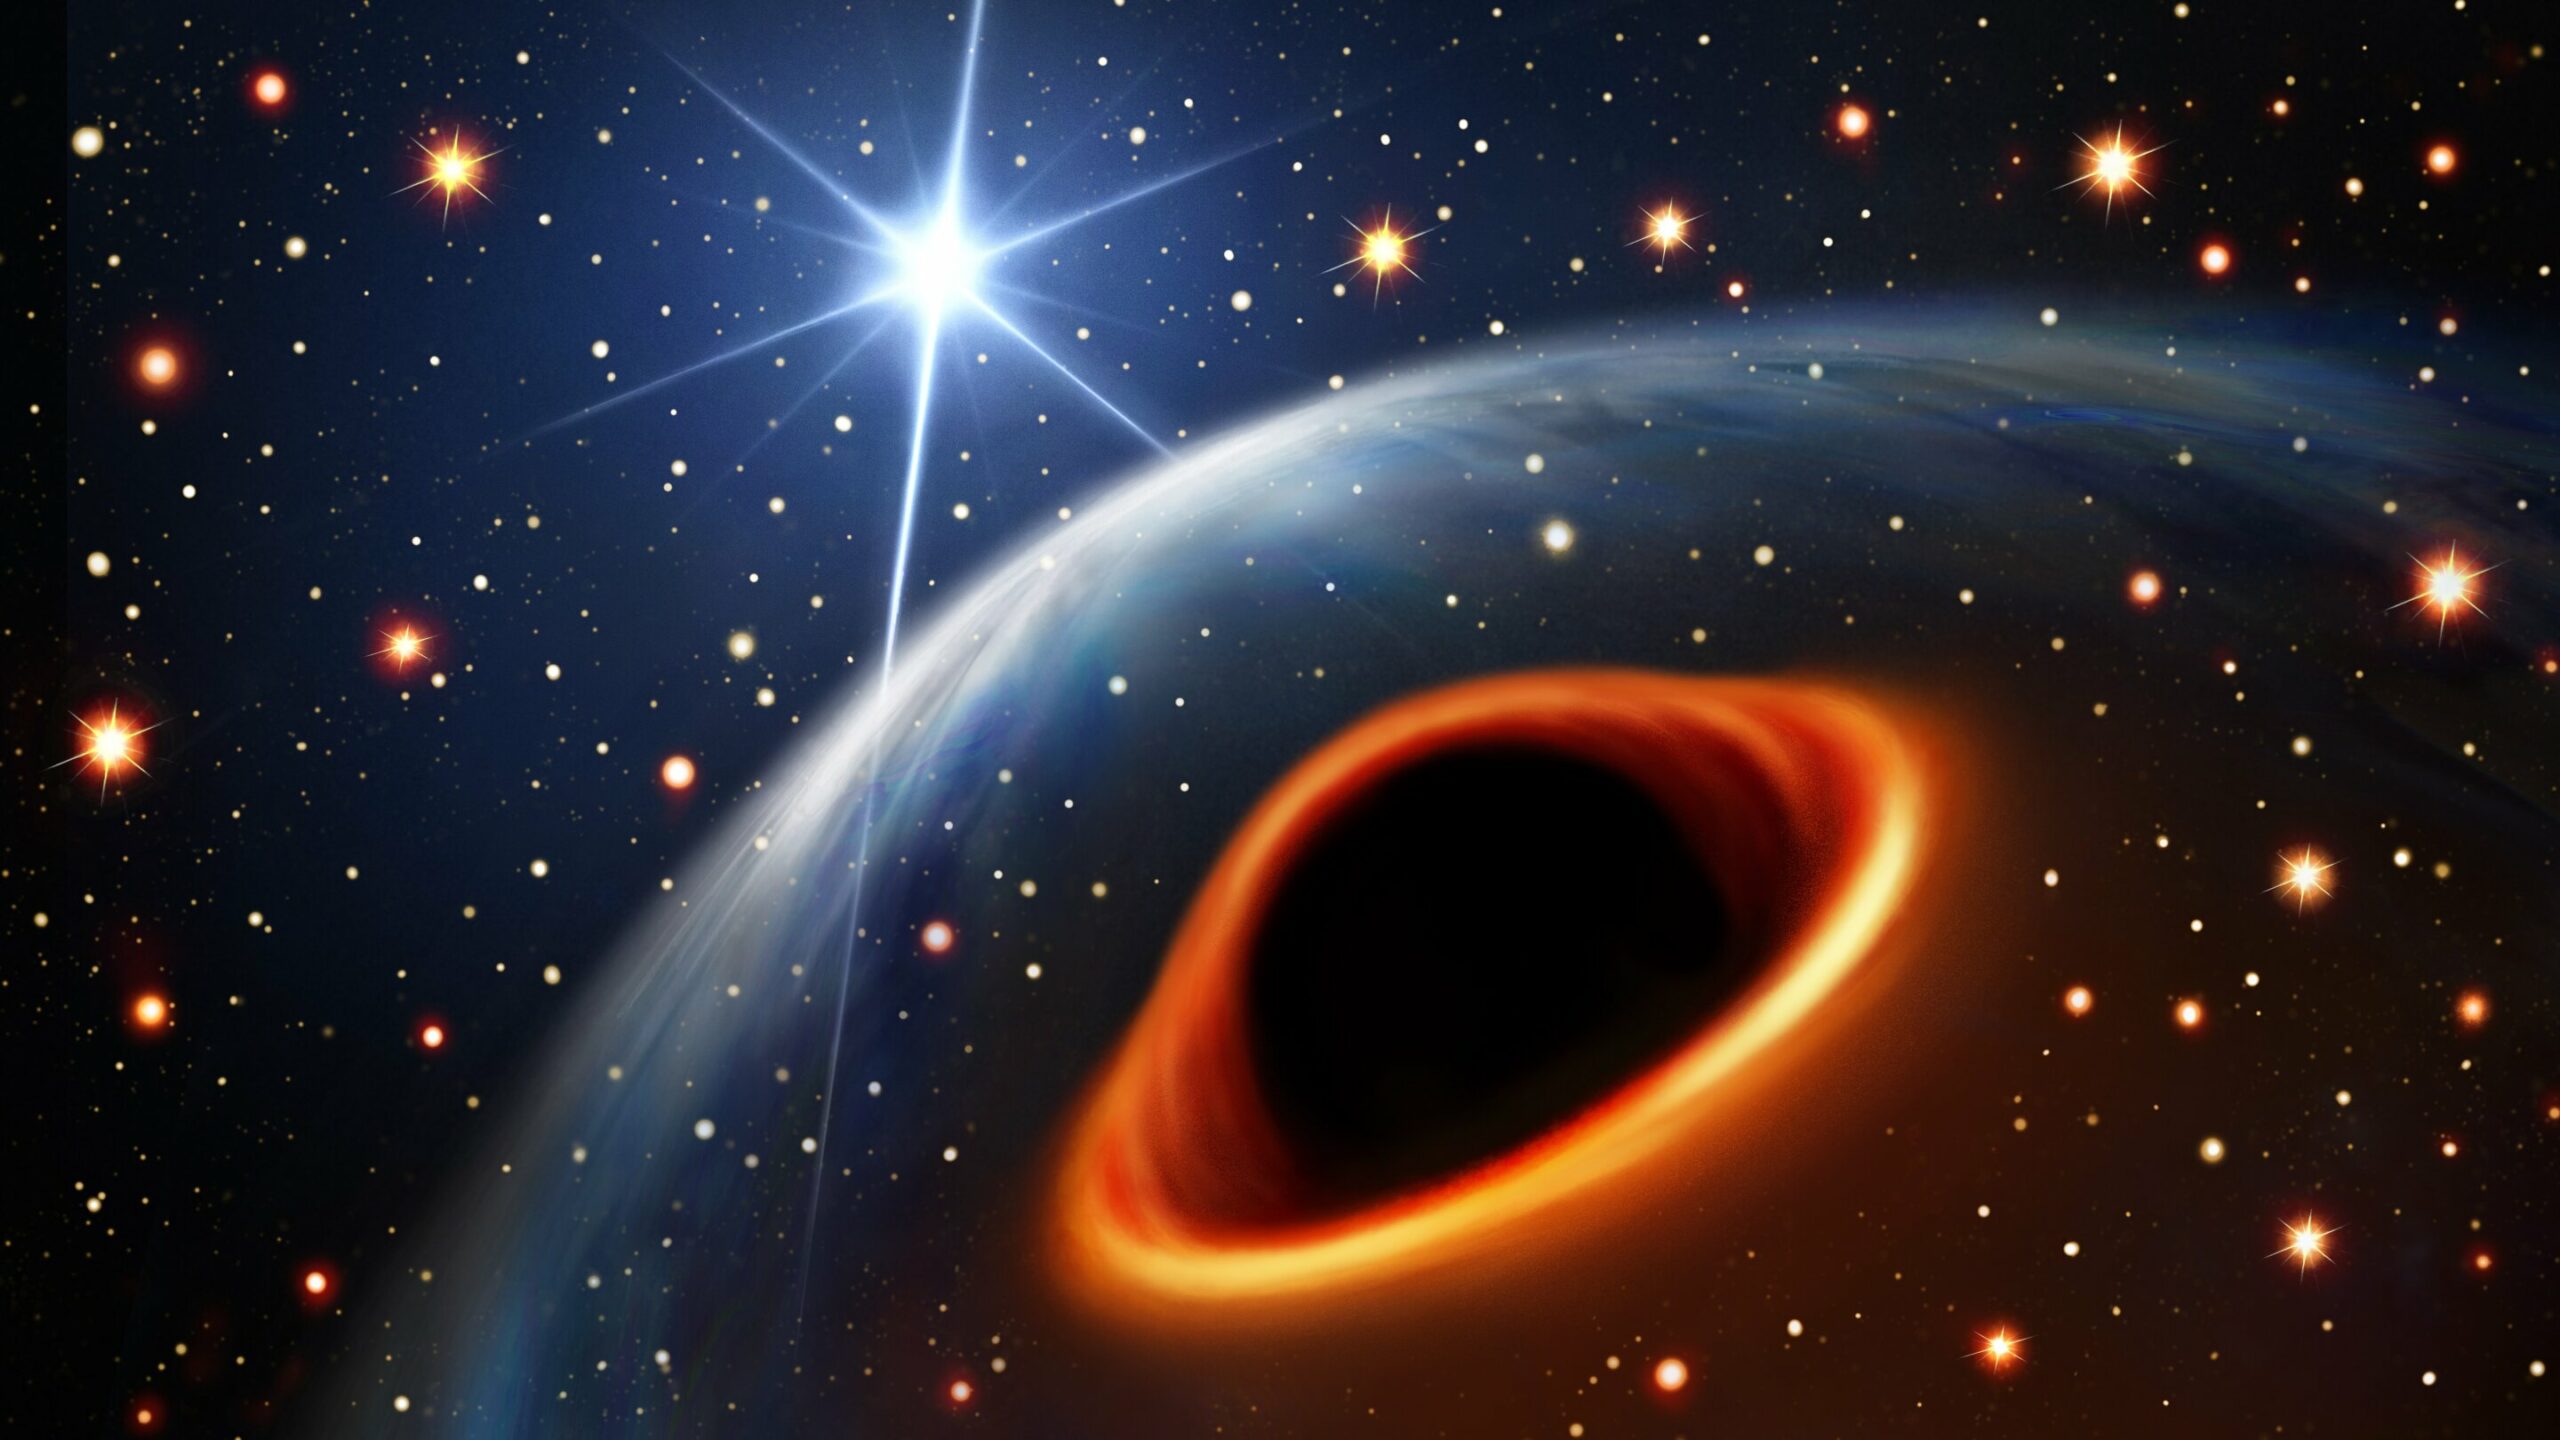 MeerKAT Reveals Enigmatic Celestial Object in the Milky Way: Is it the Lightest Black Hole or the Heaviest Neutron Star?